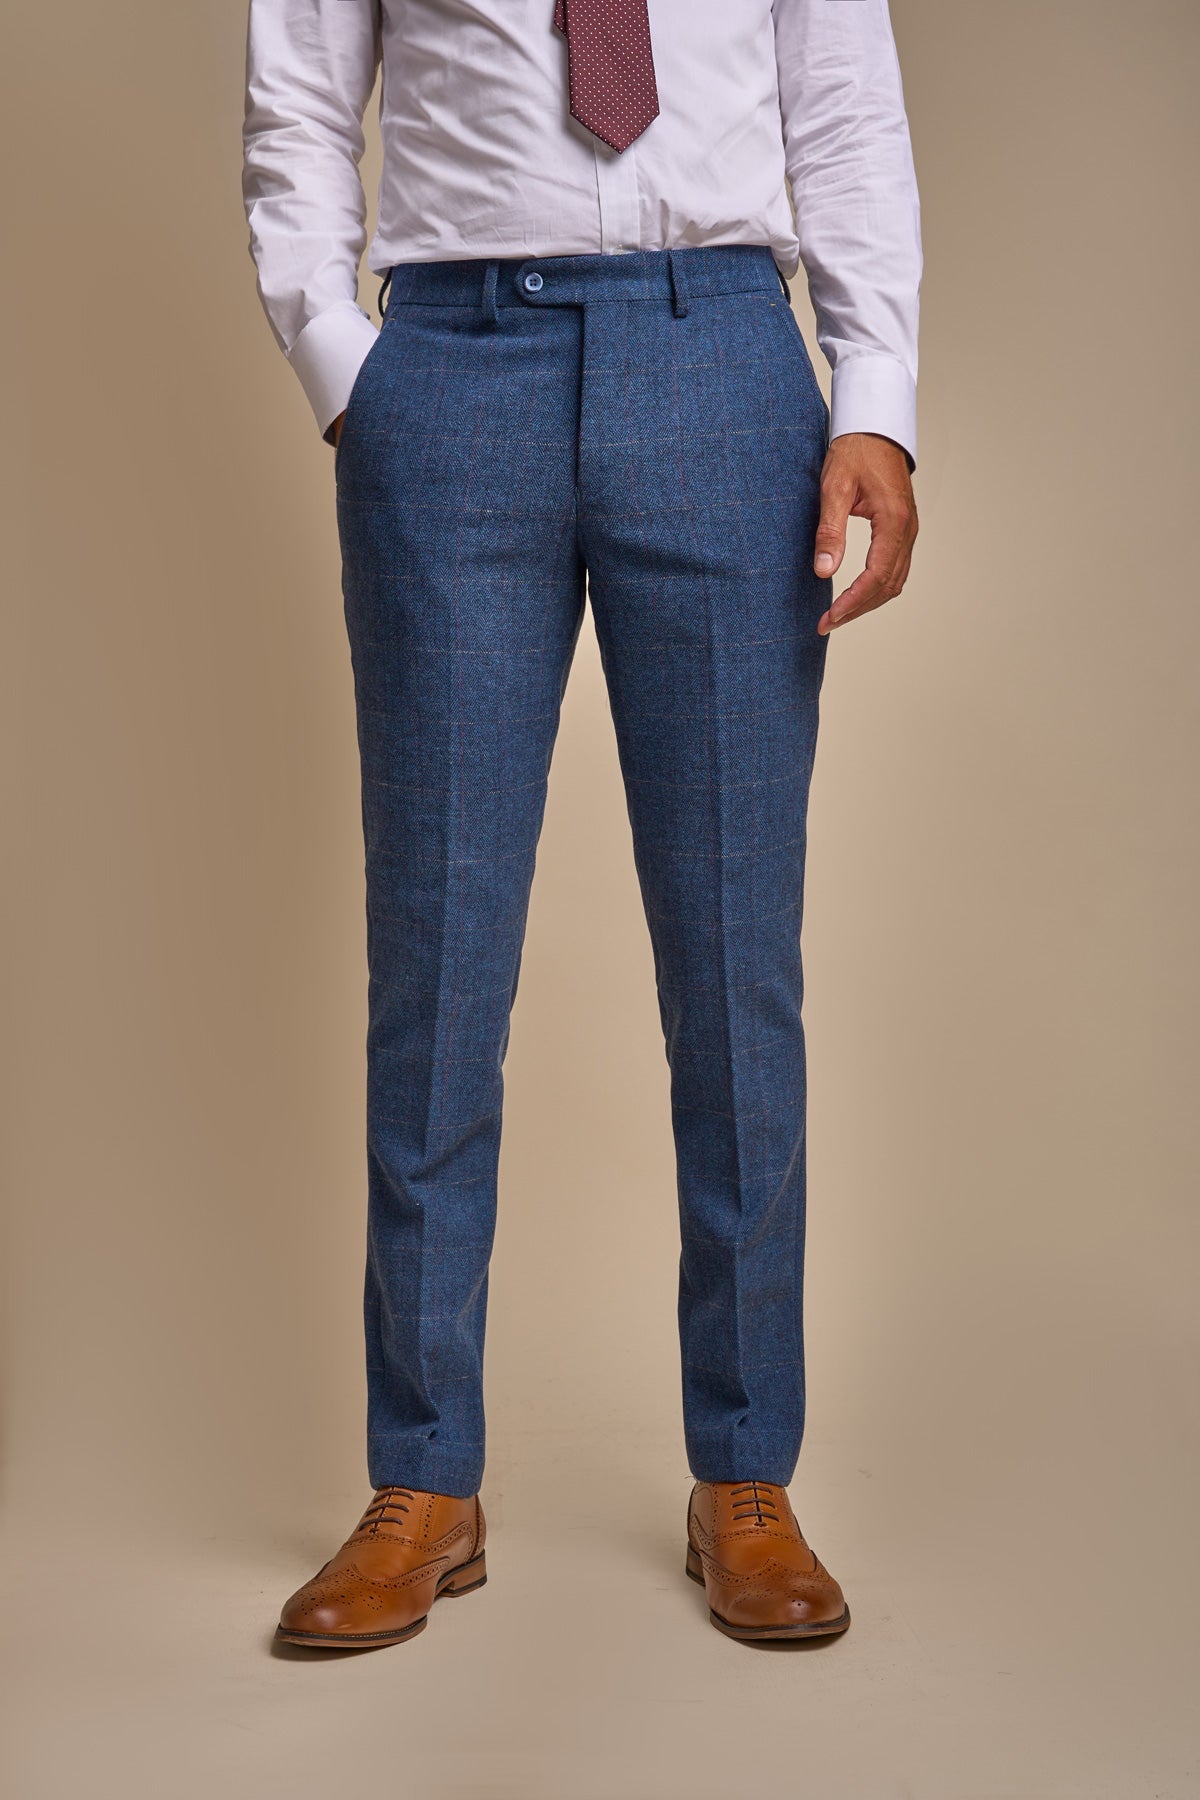 Carnegi Navy Tweed Trousers - Trousers - 28R - Swagger & Swoon